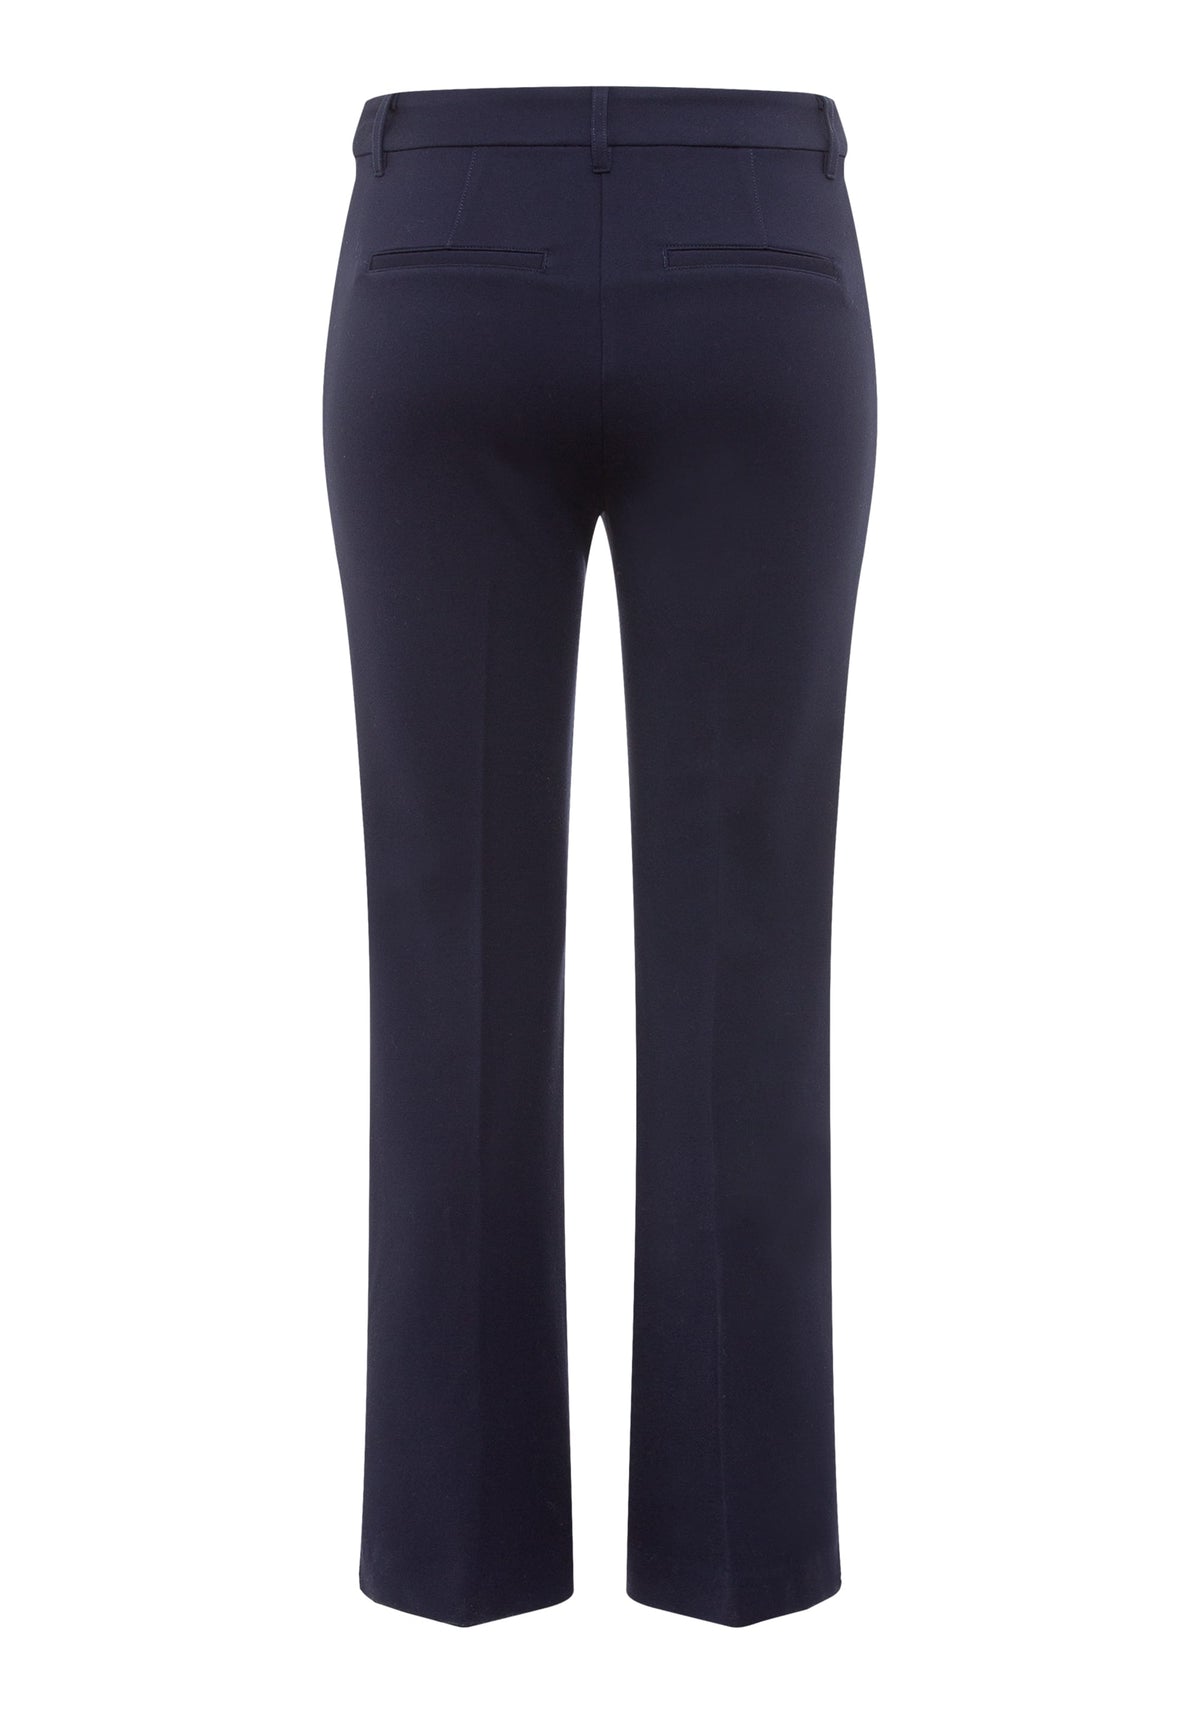 Pia Fit Jersey Knit Bootcut Pant